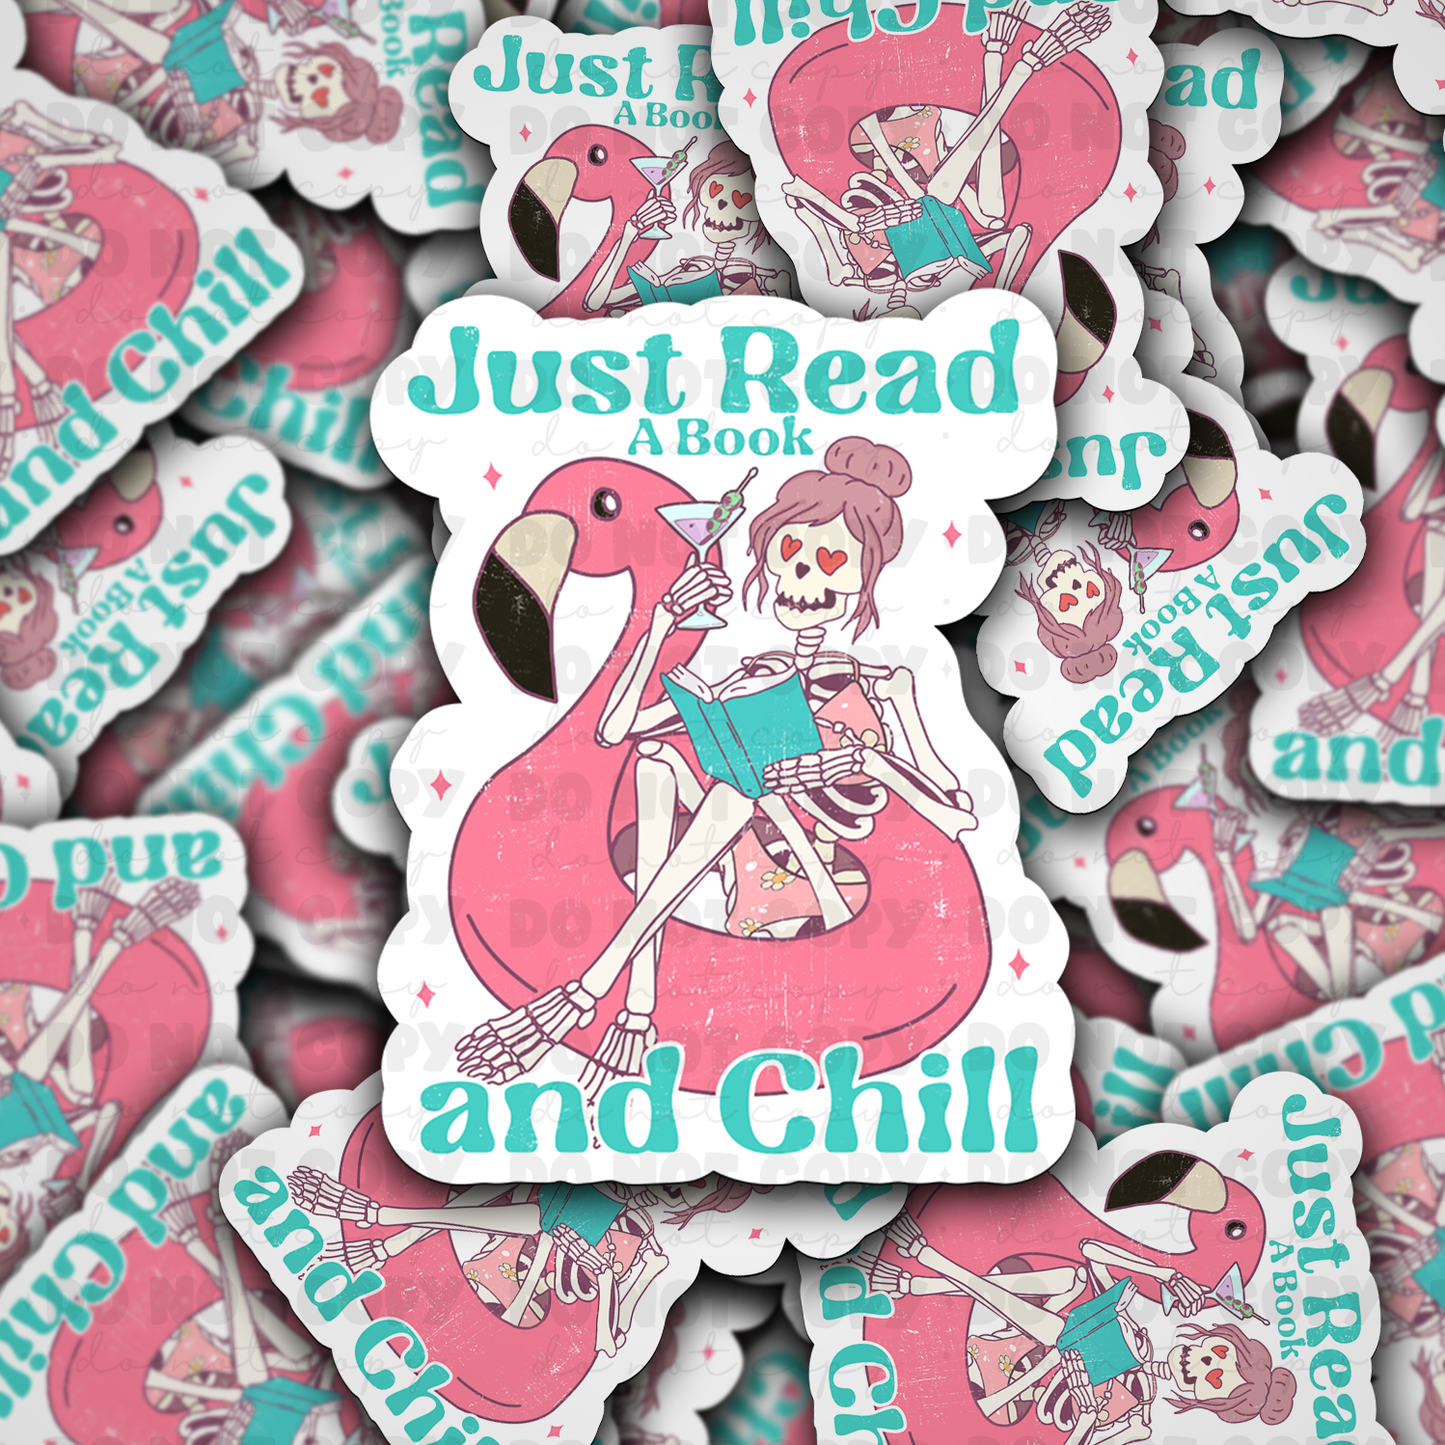 DC 925 Just read a book and chill Die cut sticker 3-5 Business Day TAT (Copy) (Copy)